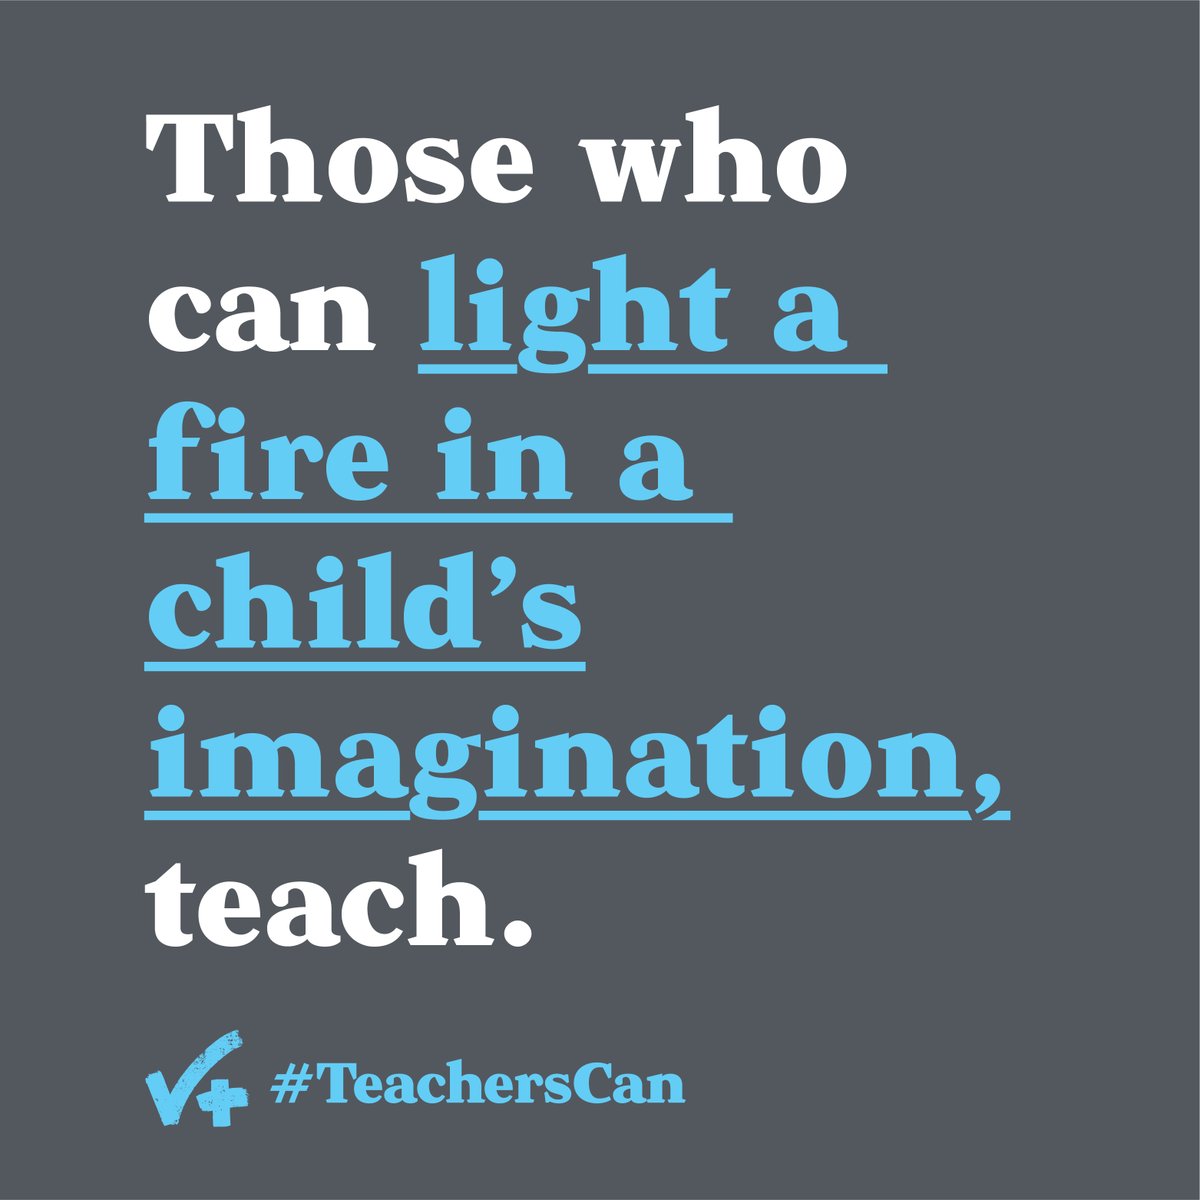 In honor of our amazing teachers, please join us in wearing light blue on Monday, October 5 for World Teacher's Day. @TXTeachersCan #TeachersCan @DallasISDLeads #DallasISDLeadsWithGreatTeachers @dallasschools